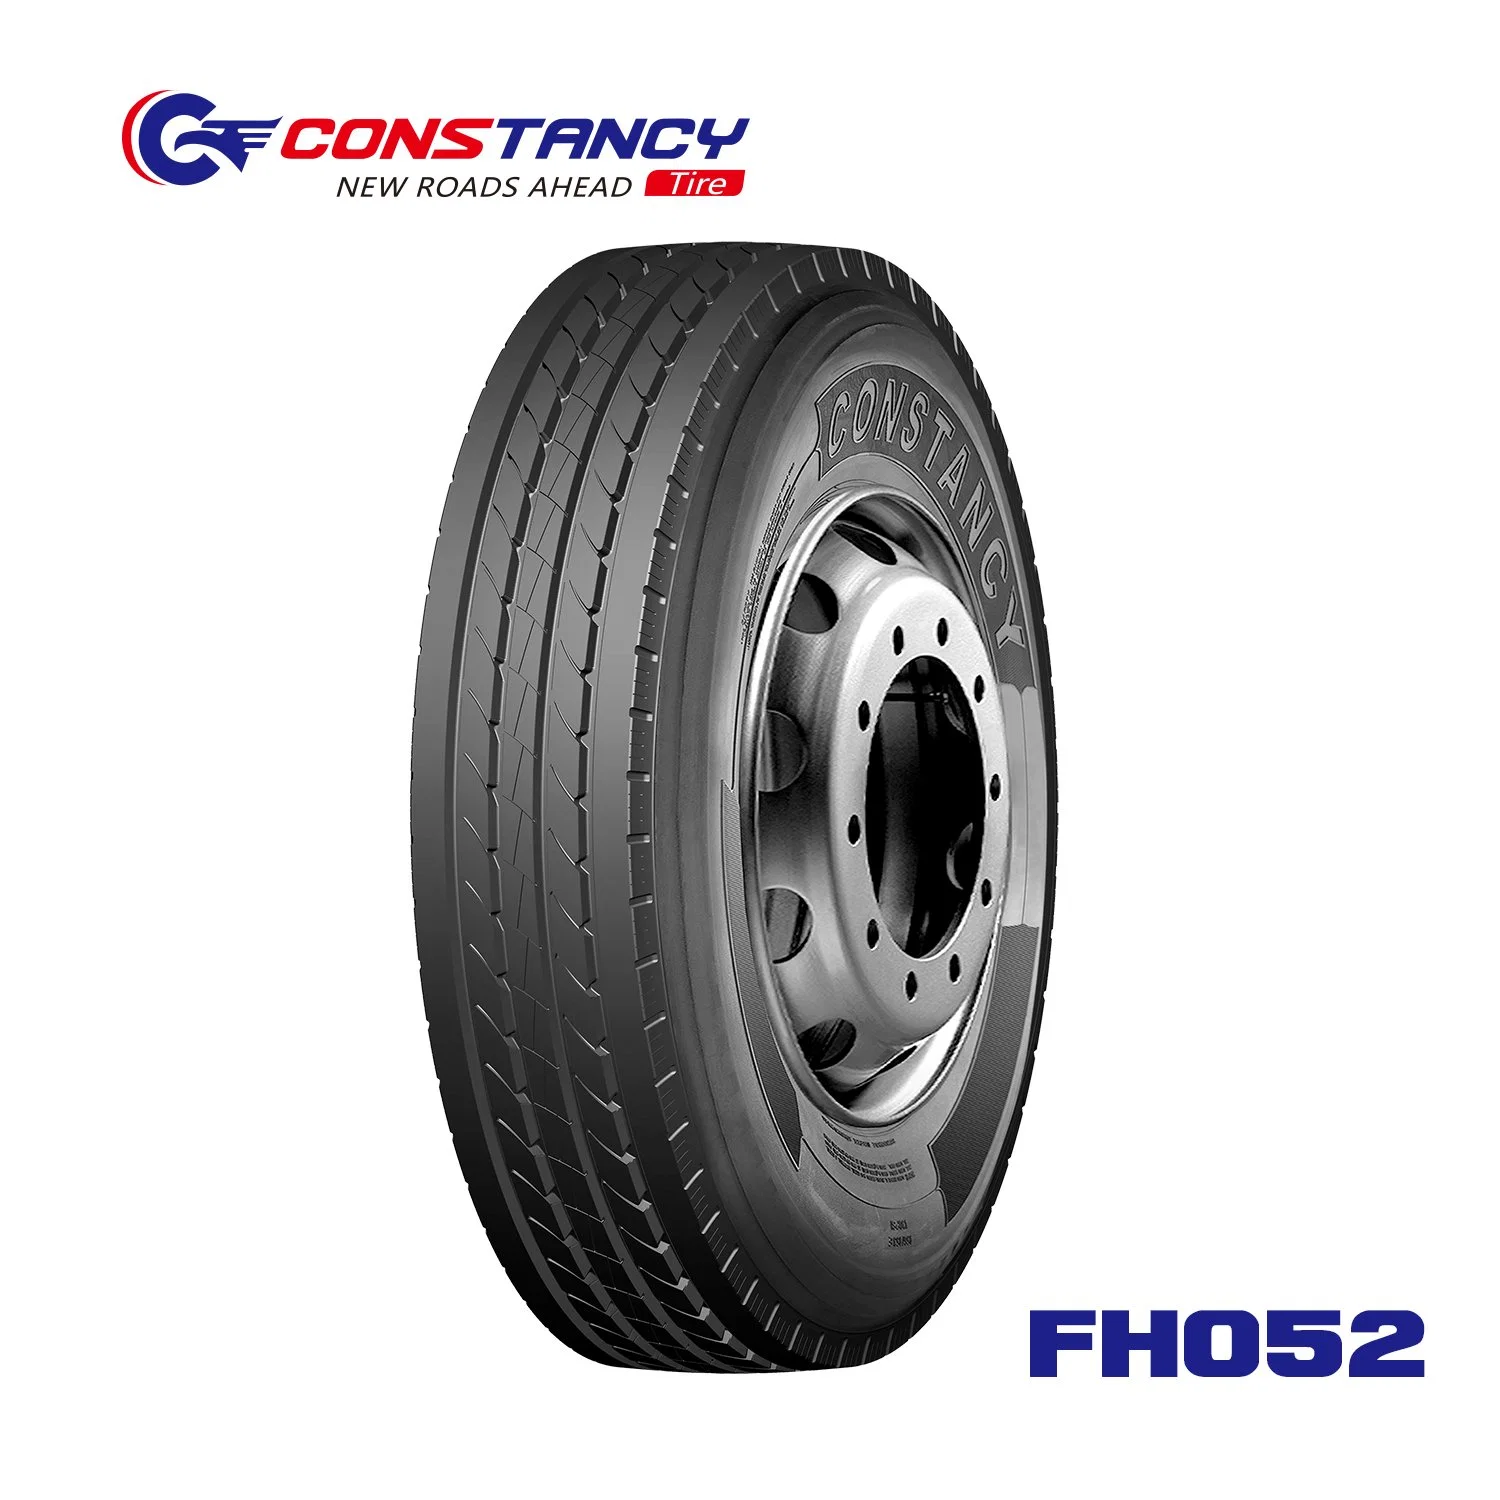 Constancy Truck Bus Tyre, TBR, Light Truck, Steer and Trailer Tyre Fh052 (12R22.5)